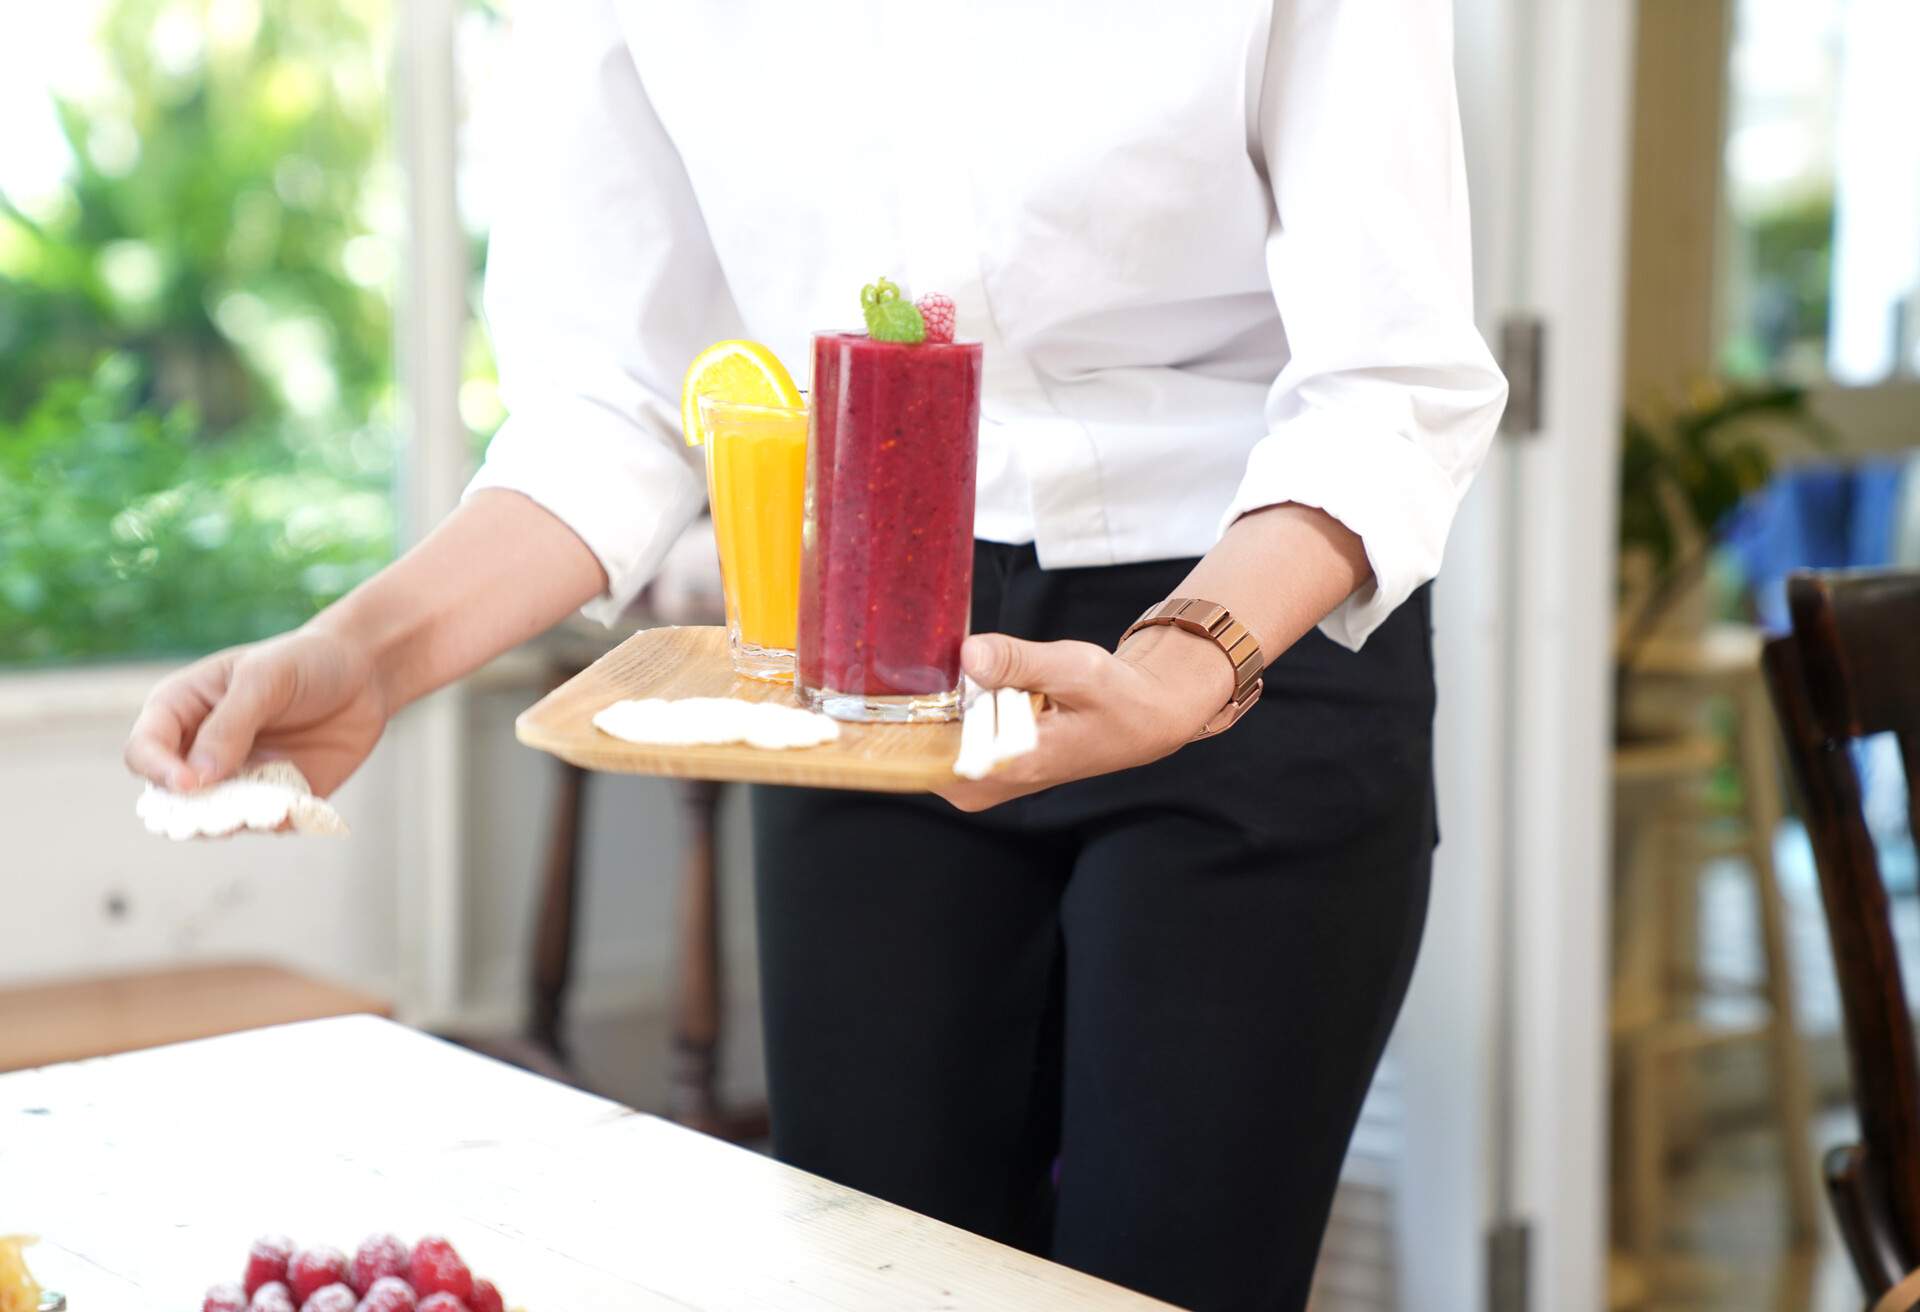 Waiter body part holding the healthy drink doing serving on the table